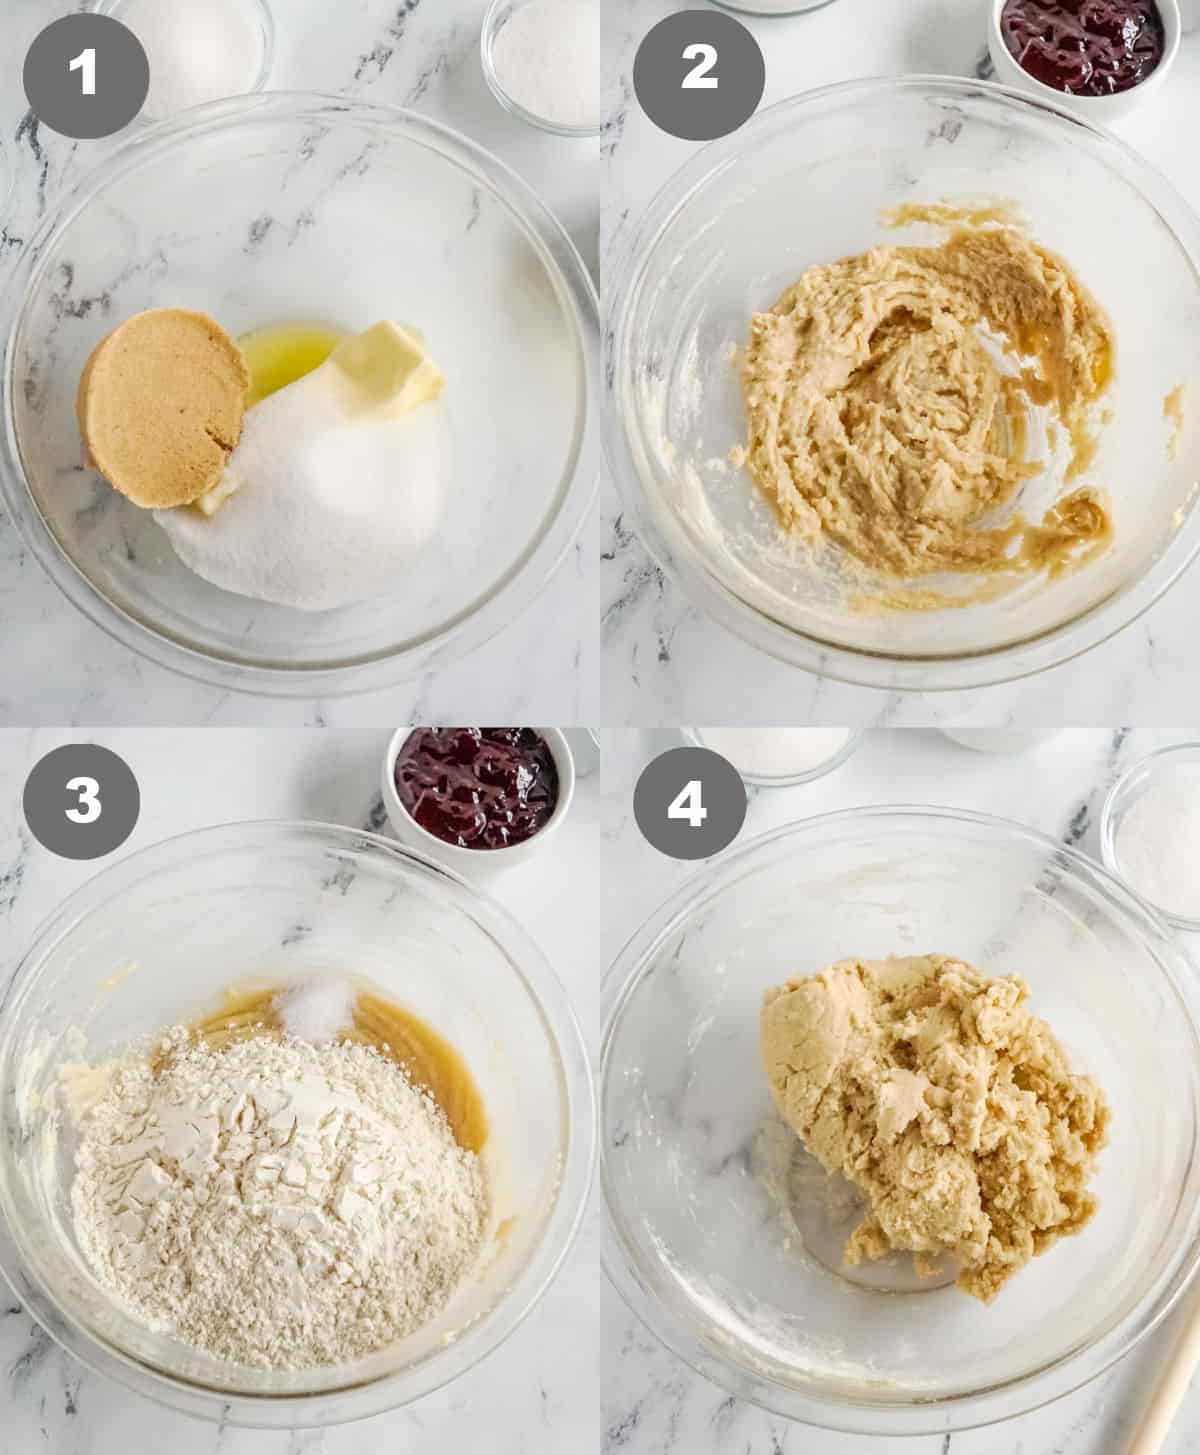 Four process photos. Firt one, The wet ingredients in a bowl and ready to mix. Second one, all the wet ingredients that have been mixed together. Third one, the dry ingredients added into the bowl. Fourth one, the dough all mixed together.